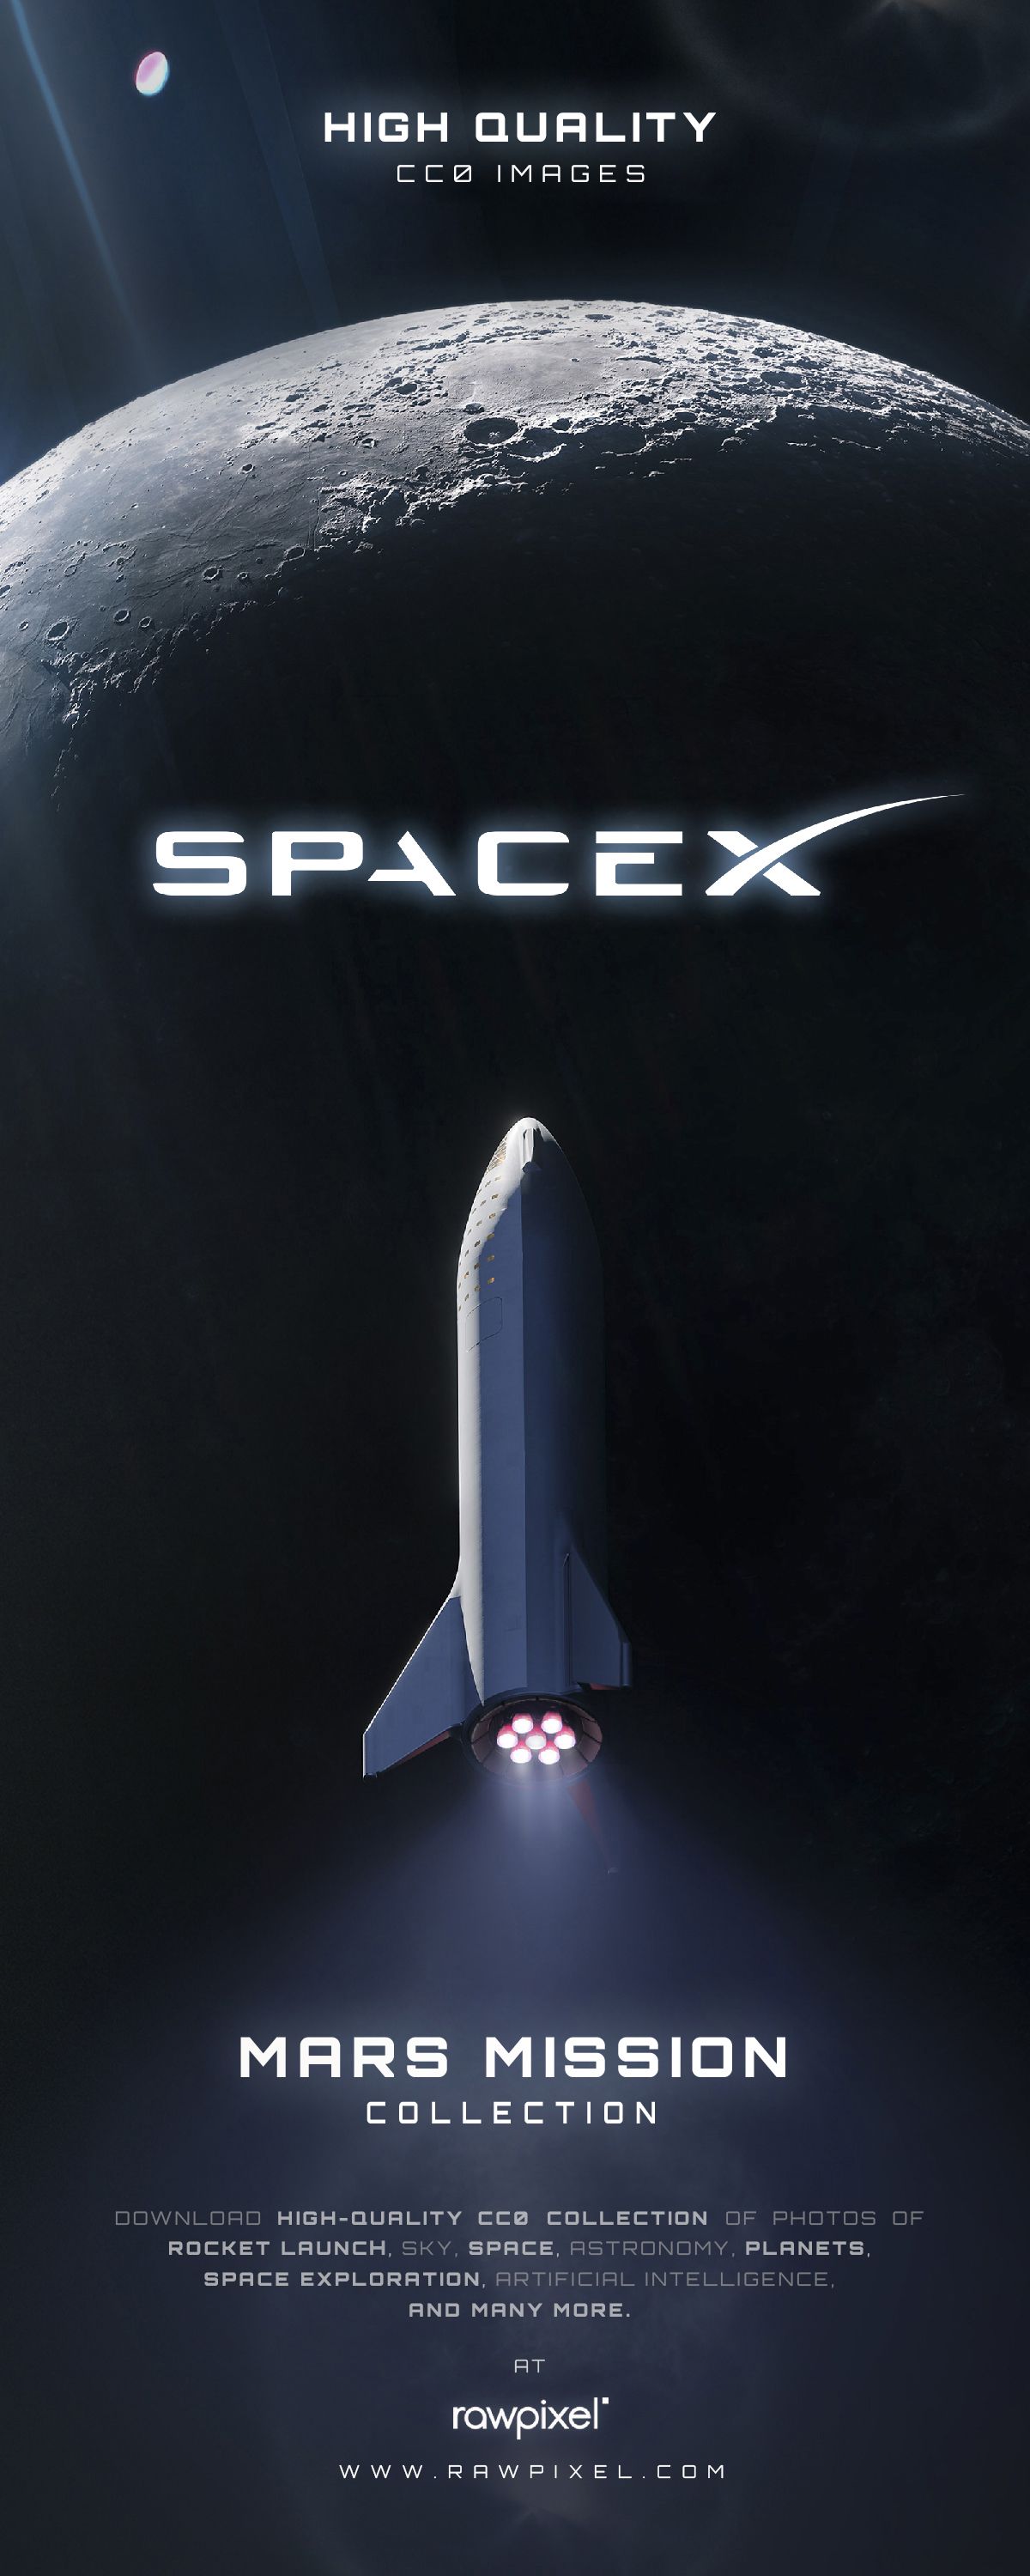 High Resolution Spacex Launch And Exploration Photo Set